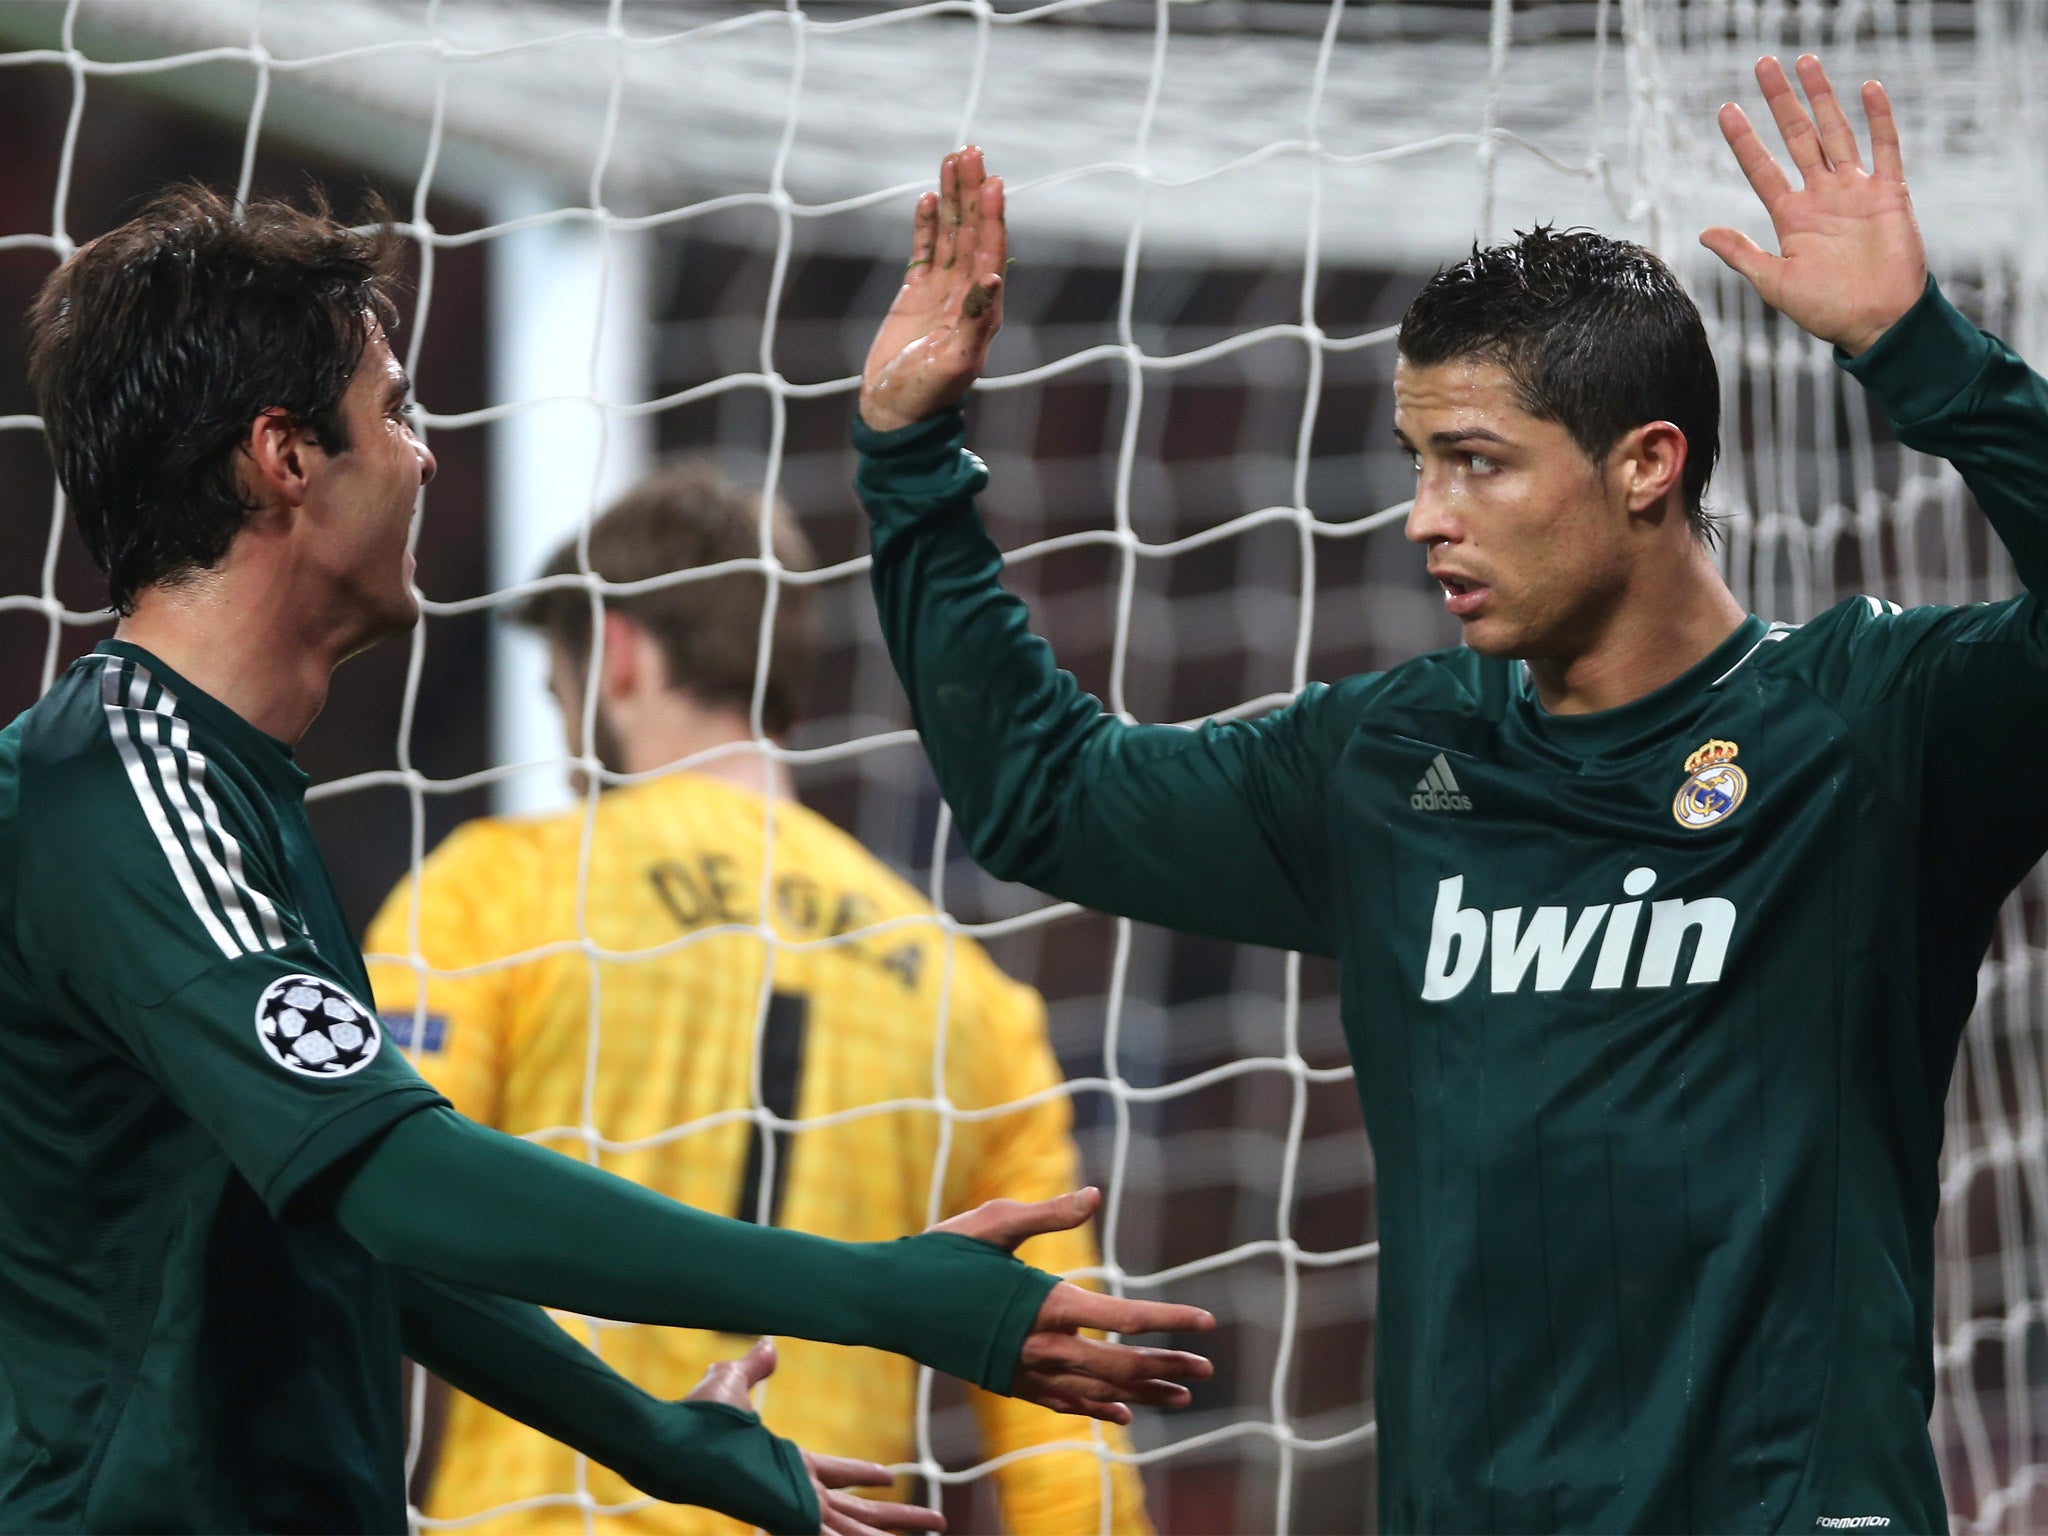 Ronaldo celebrates with Kaka, though tries his best to show respect to his former employers